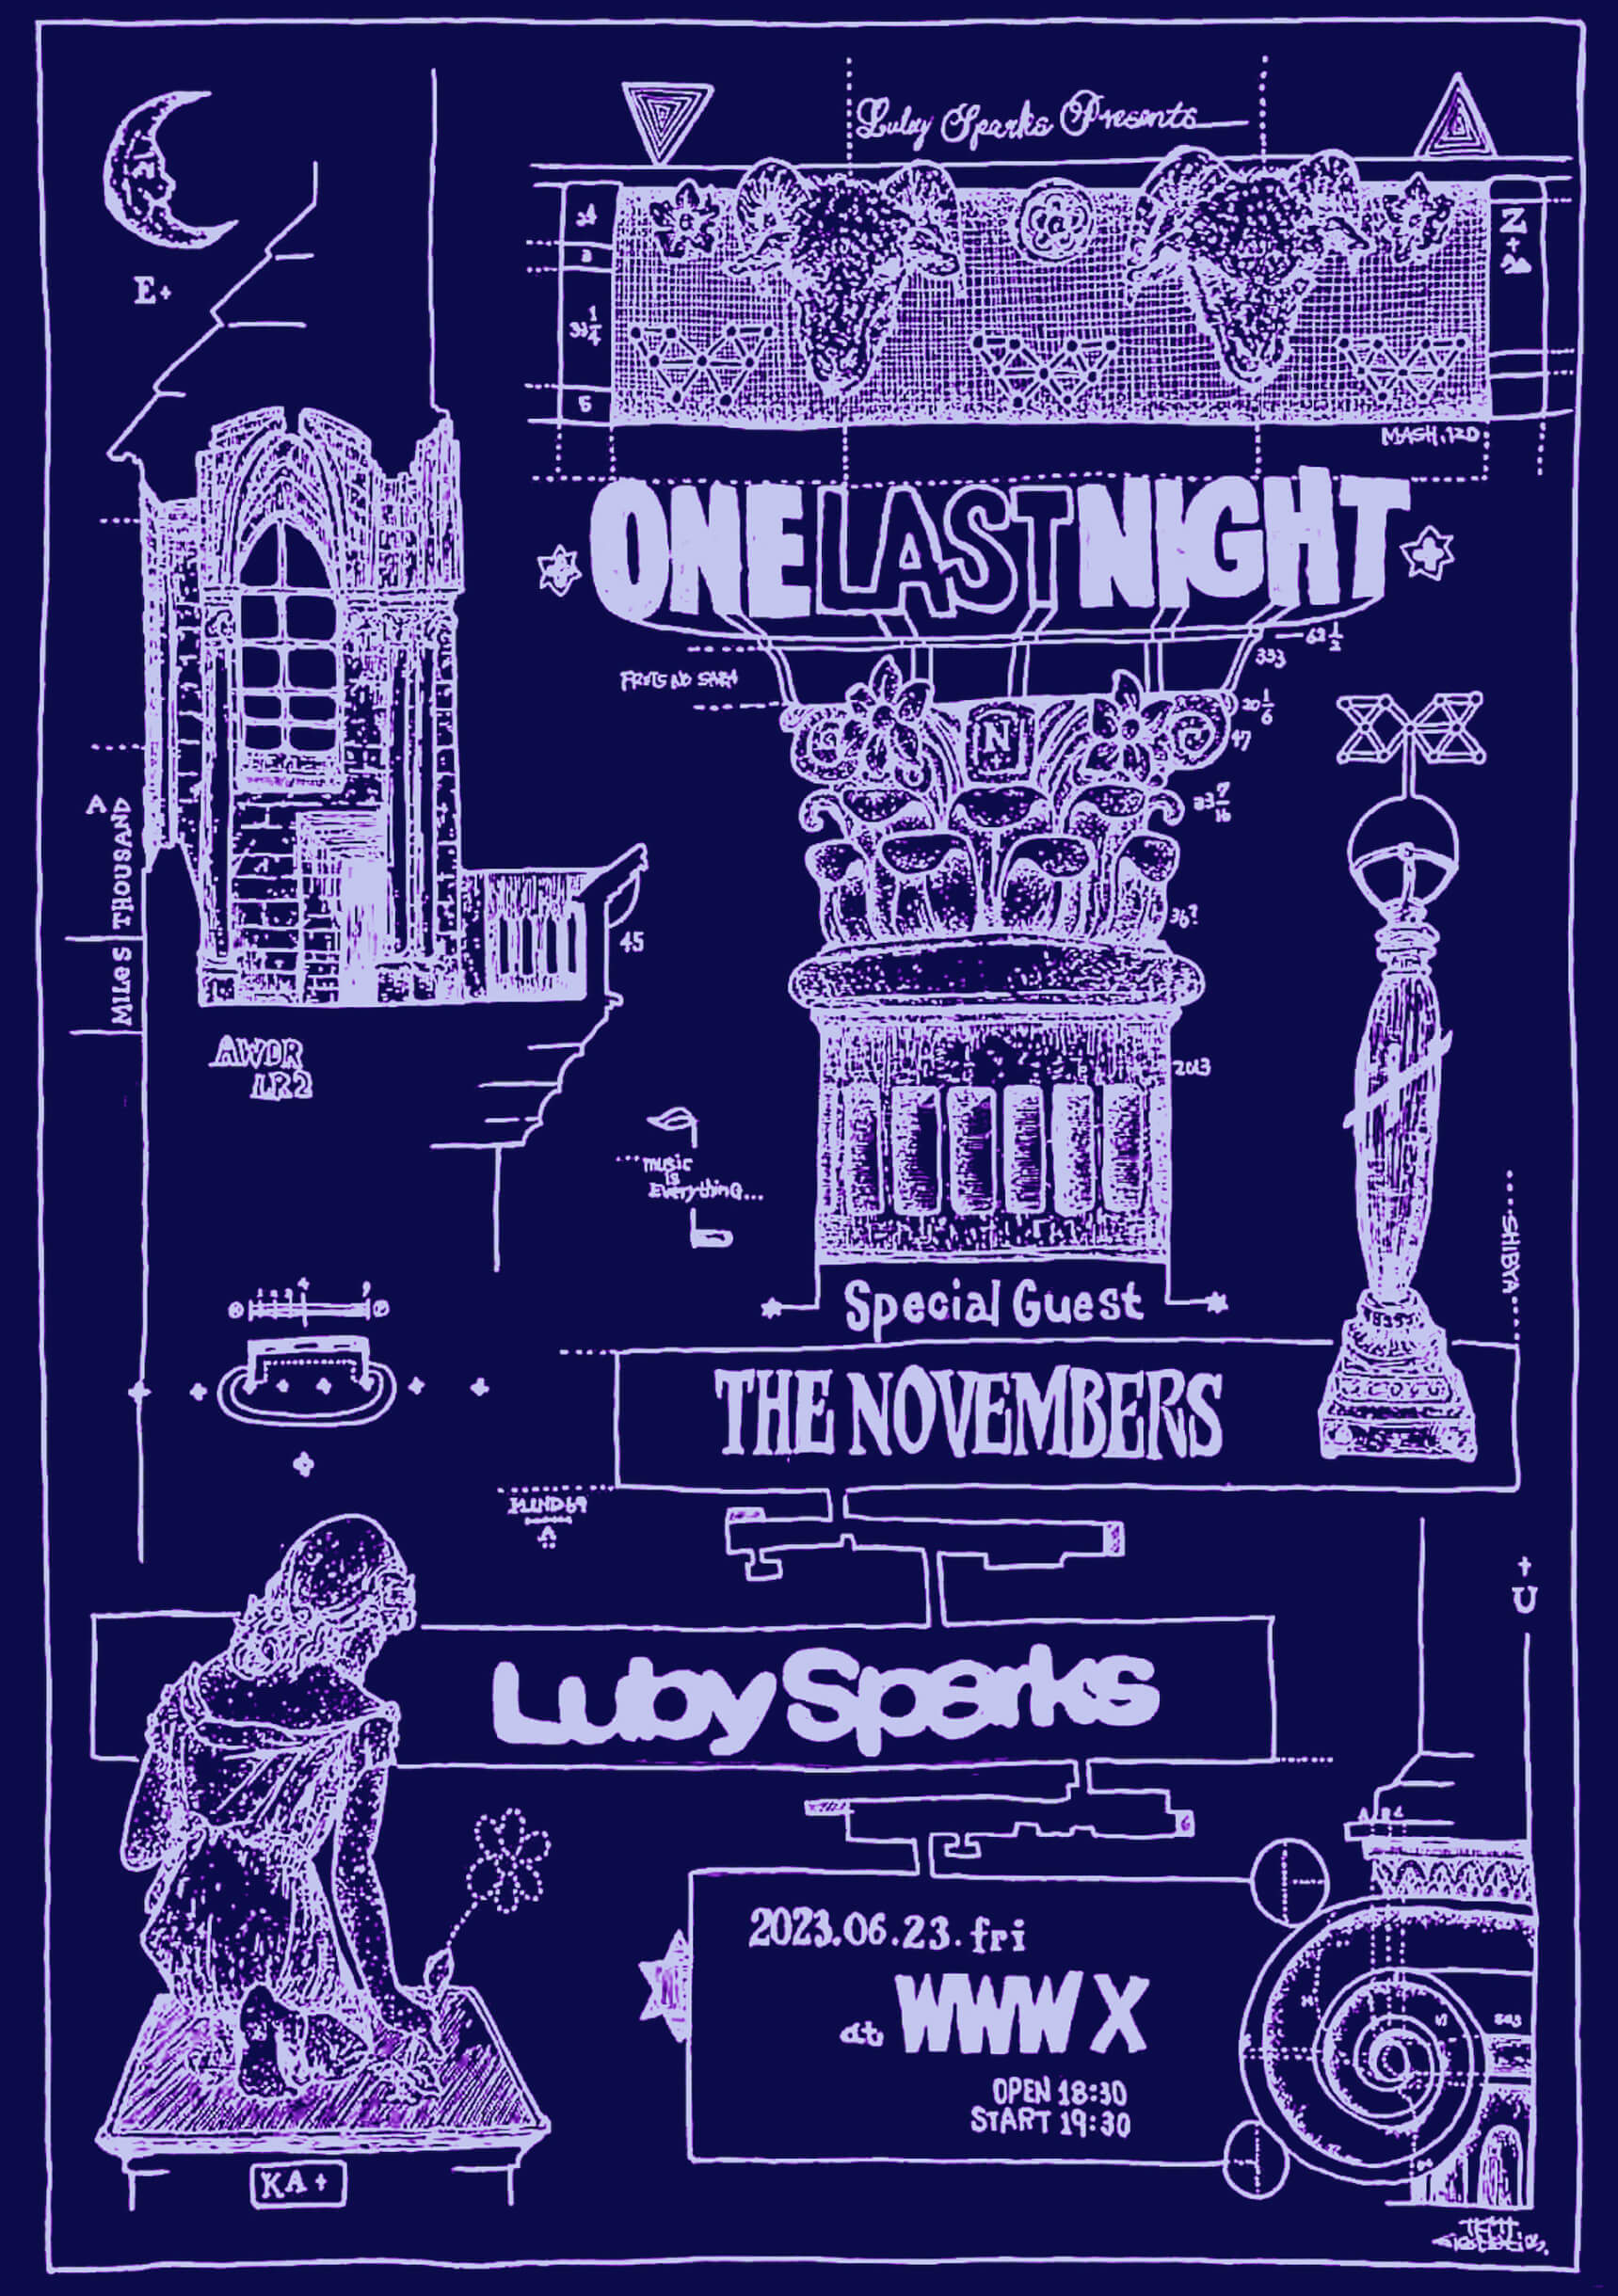 Luby Sparksの自主企画＜One Last Night＞にTHE NOVEMBERSの出演が決定｜“One Last Girl ”のMitsuo Tate Remixがリリース music230519-luby-sparks2